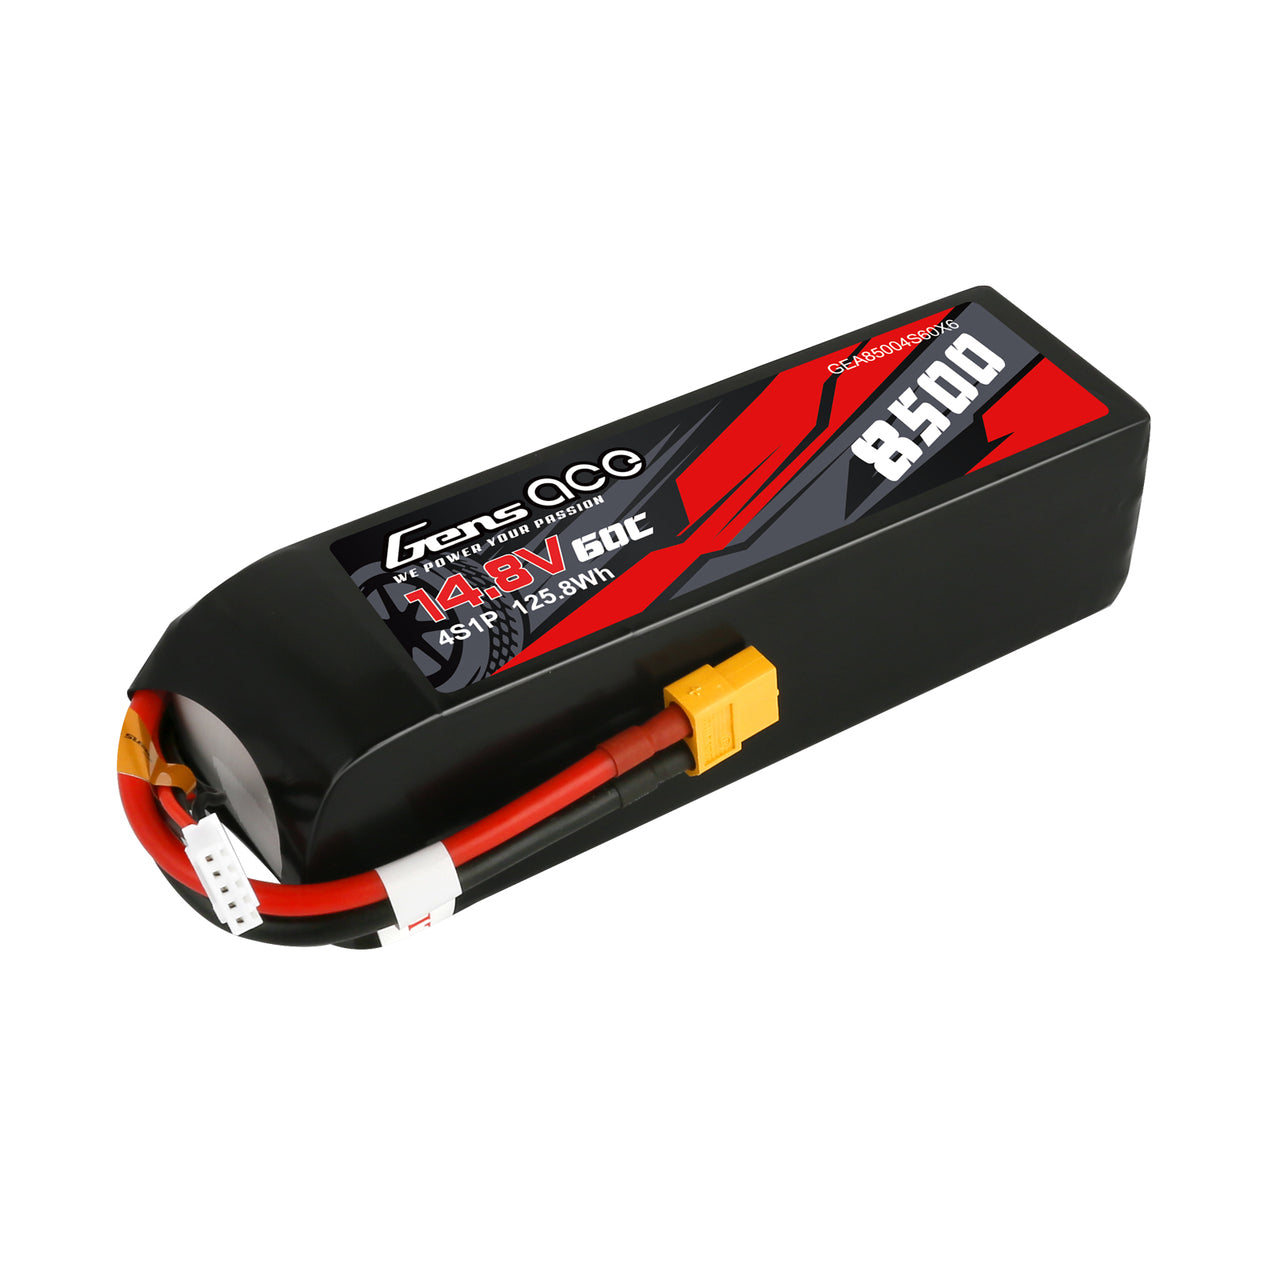 Gens Ace 14.8V 60C 4S 8500mAh Lipo Battery Pack With XT60 Plug For Xmaxx 8S Car